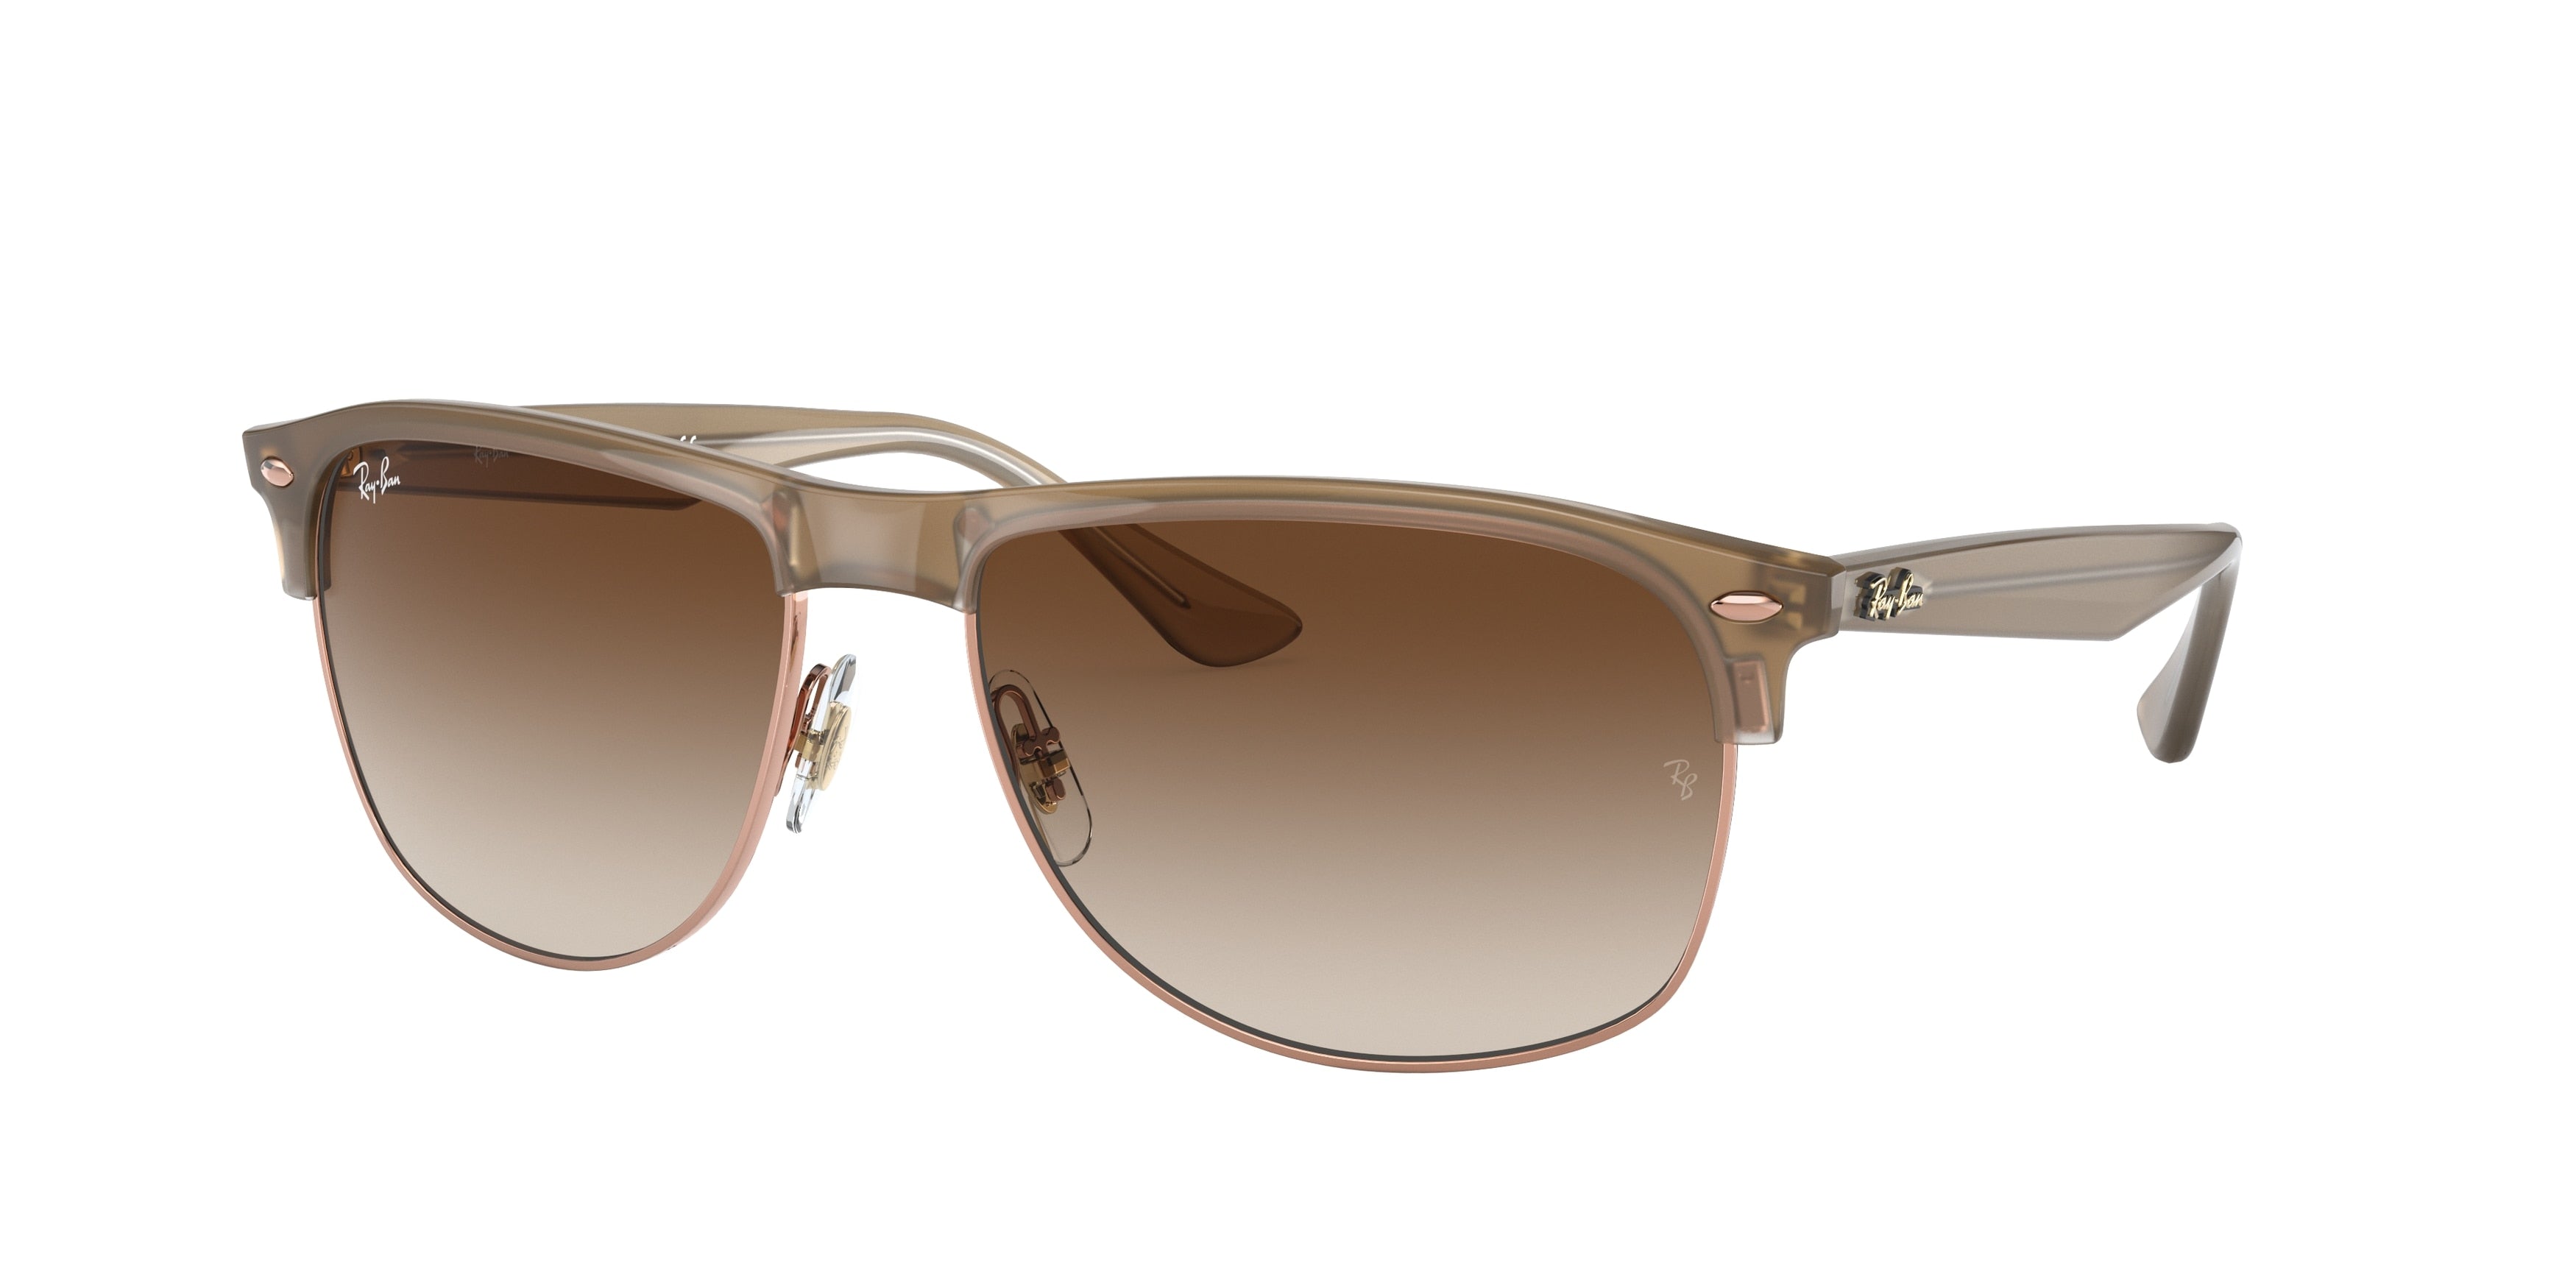 Ray-Ban RB4342 Square Sunglasses  616613-Light Brown 58-145-16 - Color Map Brown